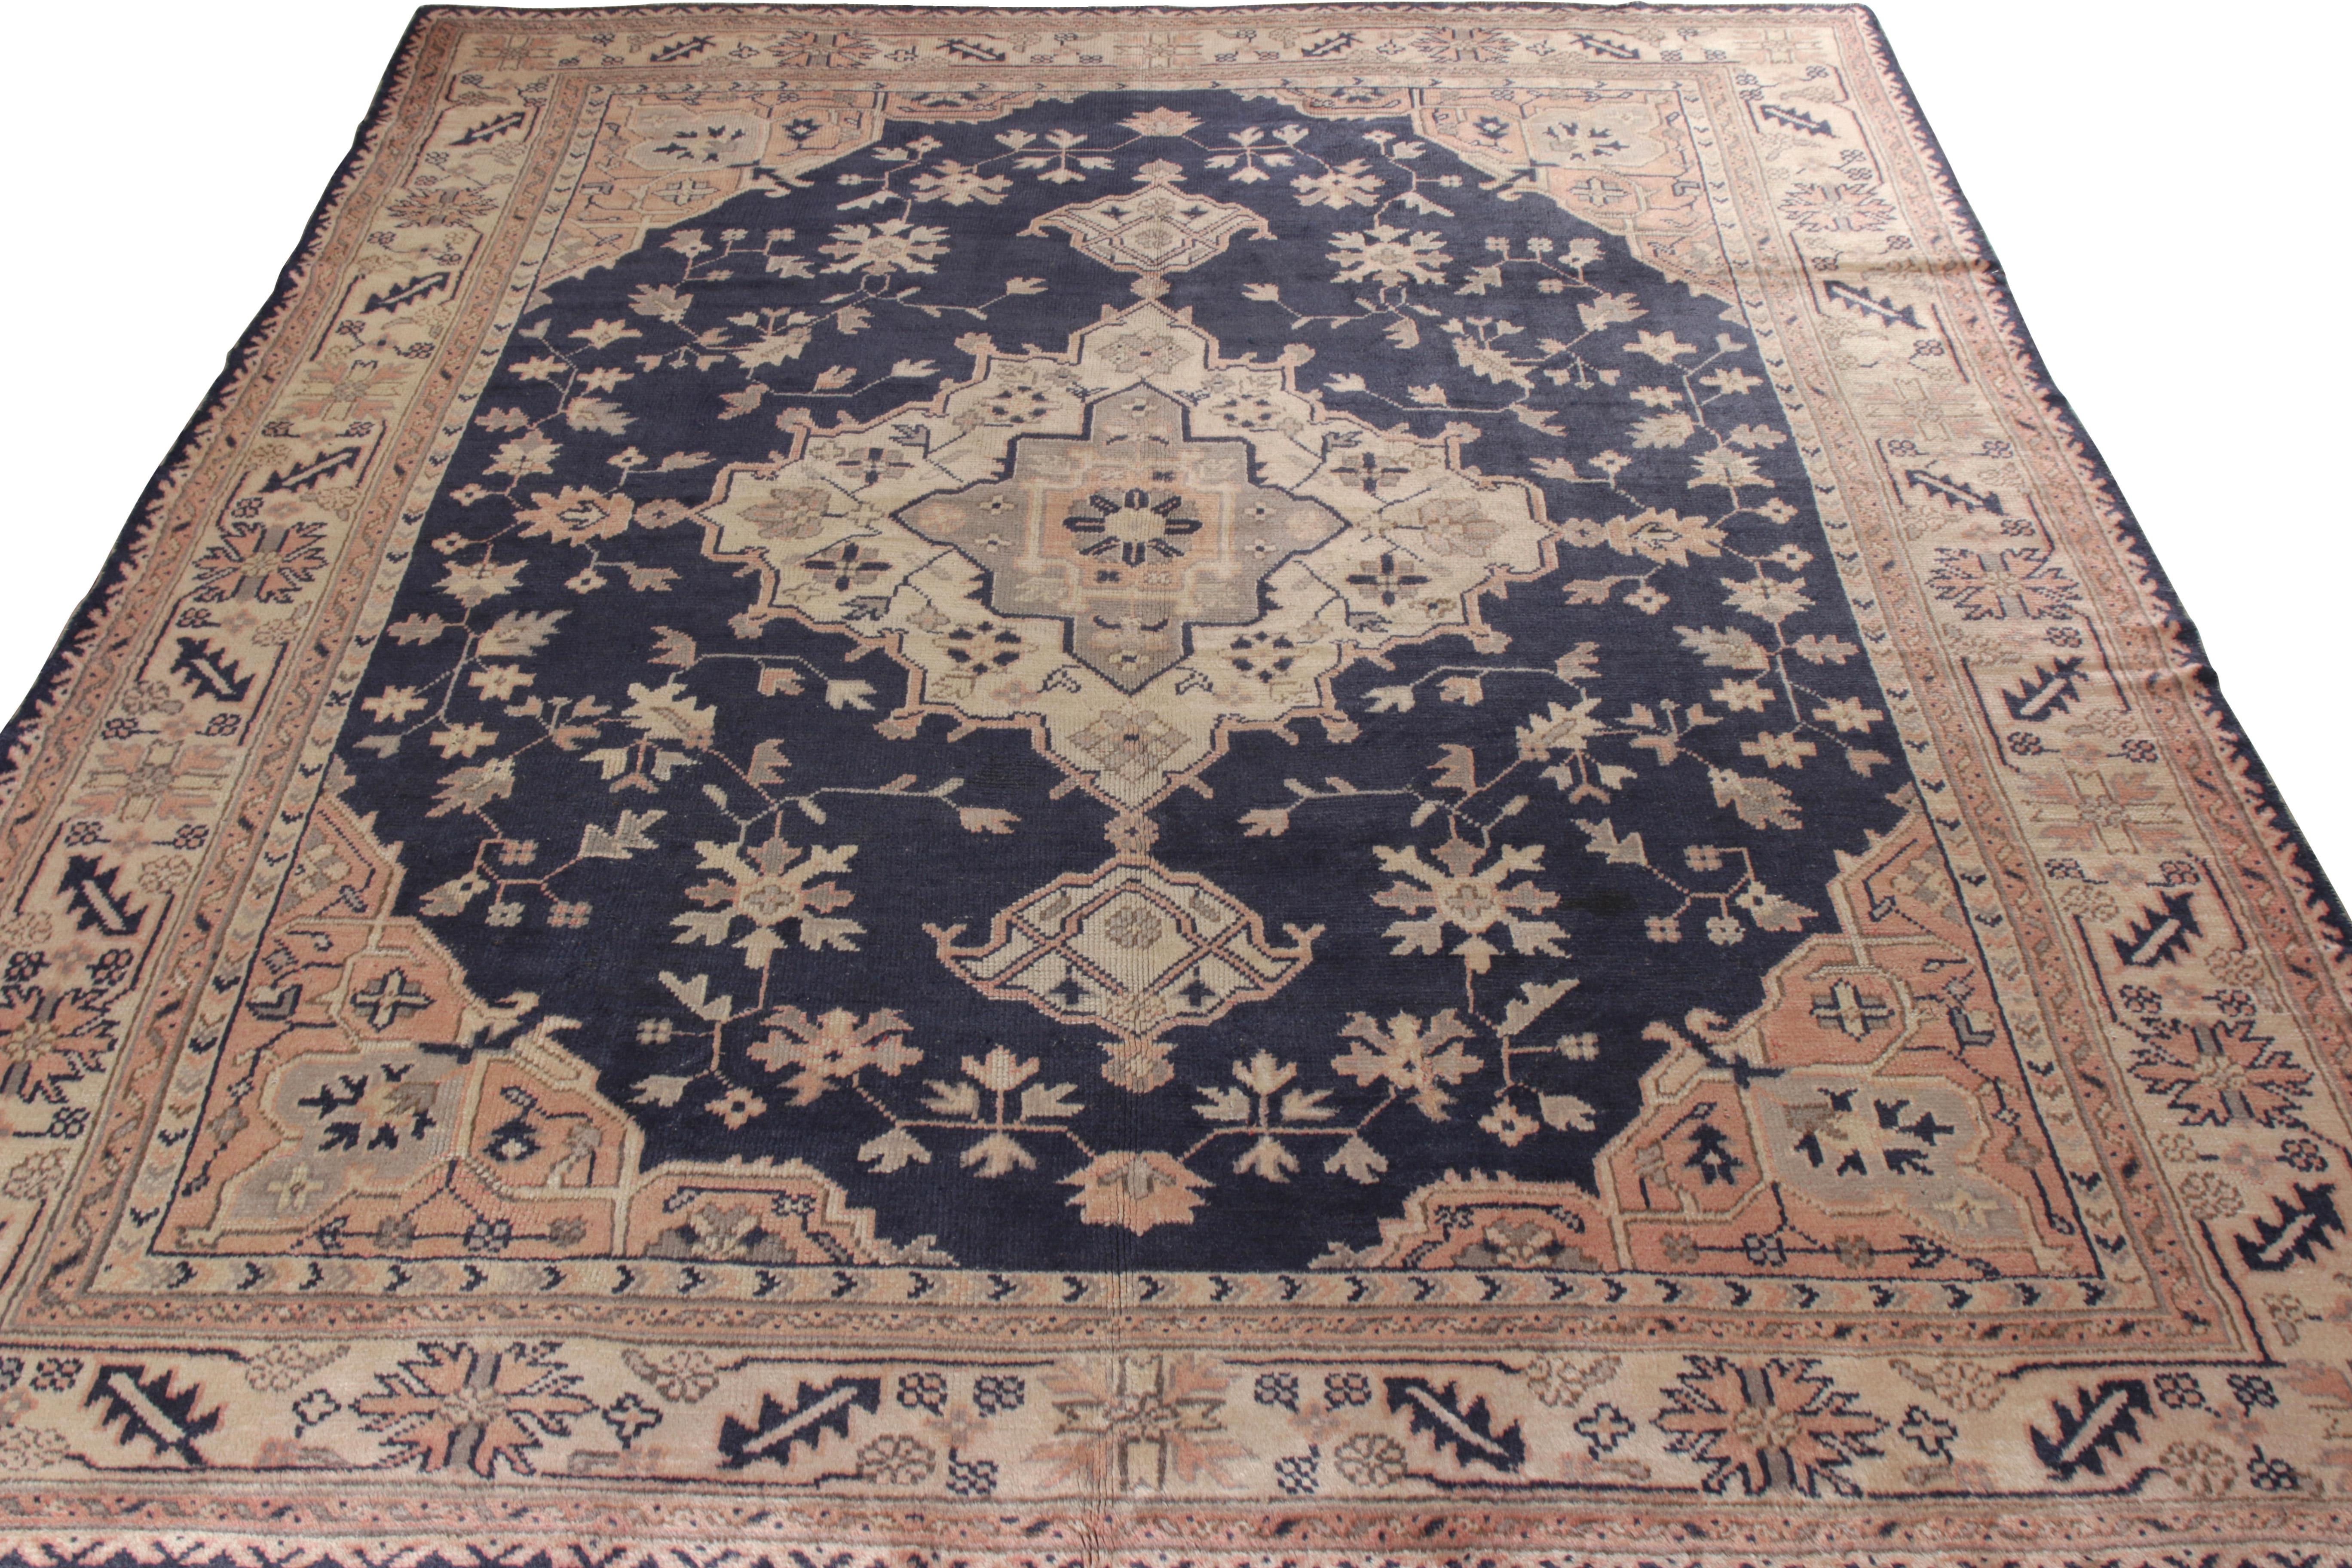 An 8x10 hand-knotted antique Oushak rug, originating from Turkey circa 1920-1930. Finely woven in wool, the rug enraptures the eye with an alluring medallion pattern embodying classic Oushak traits of finesse and elegance. This center of gravity